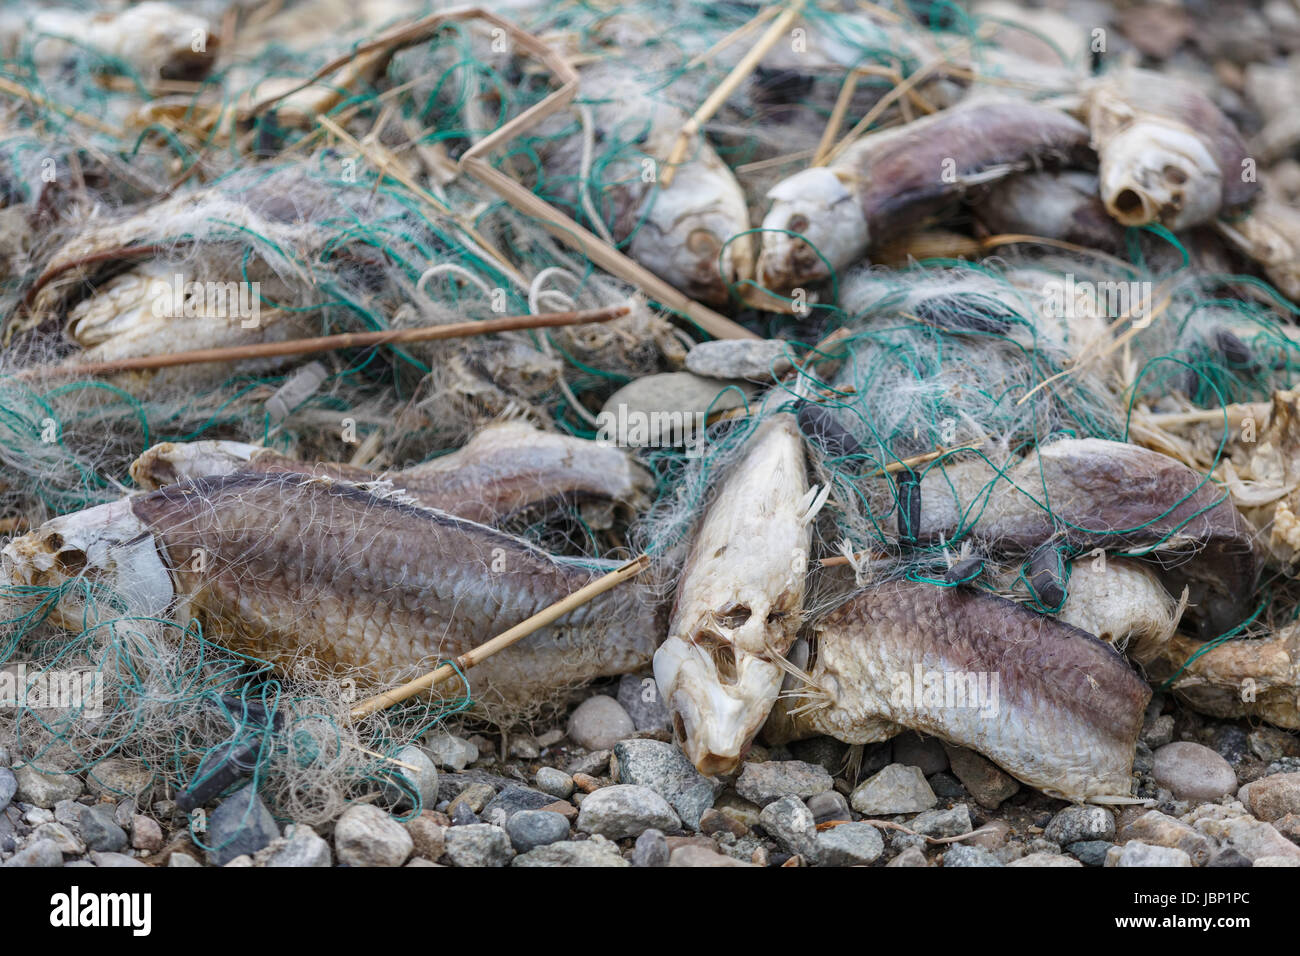 Lot of dead fish entangled in a fishing net on the shore Stock